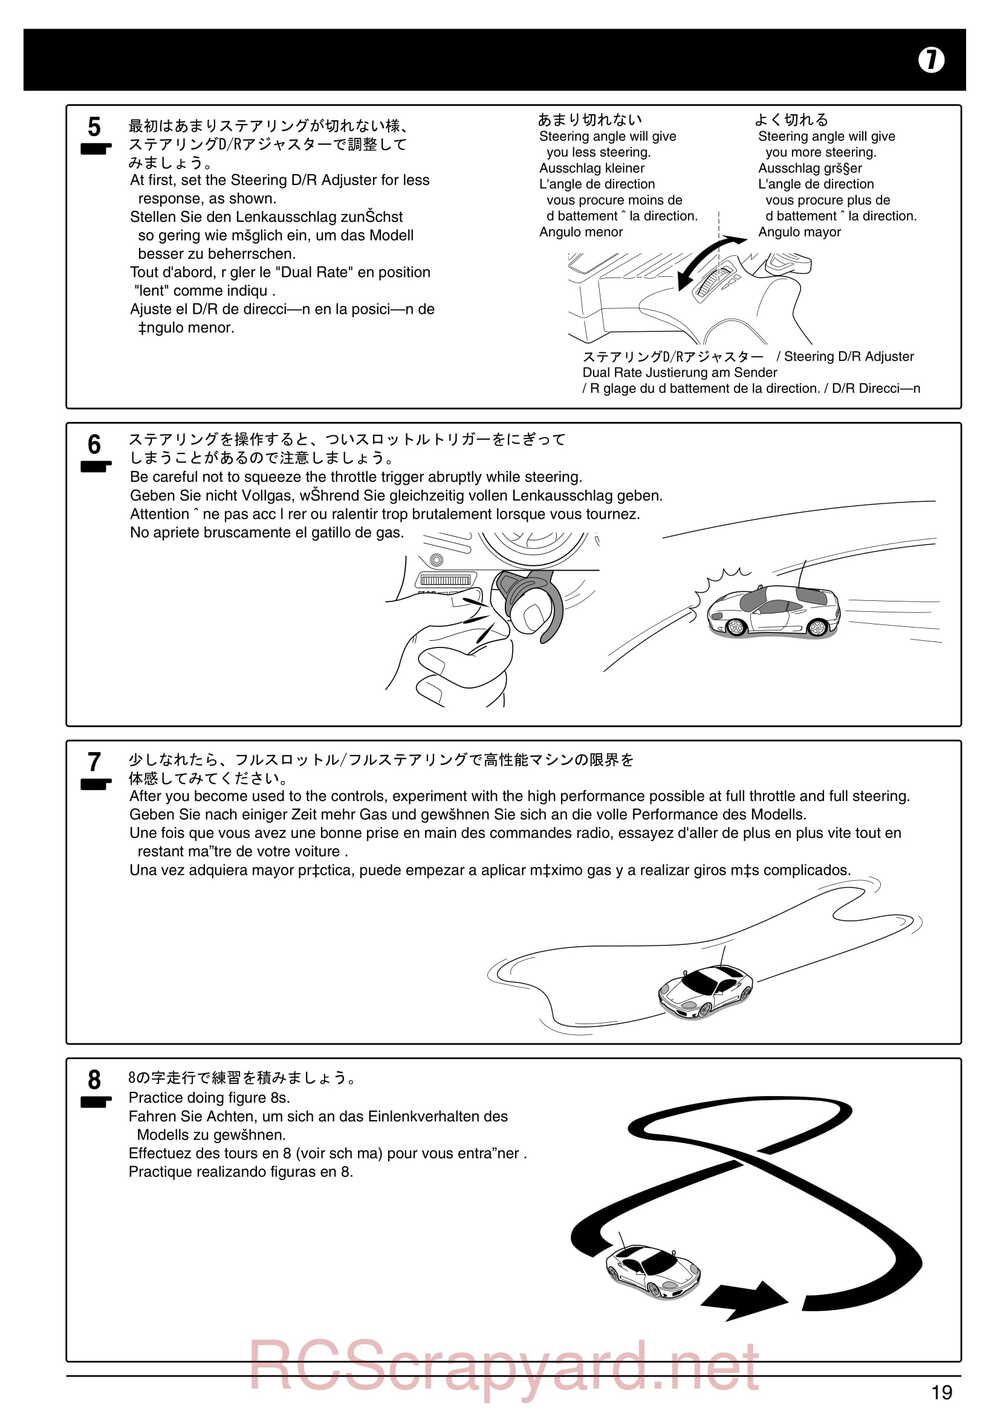 Kyosho - 30551 - a12 Sport - Manual - Page 19